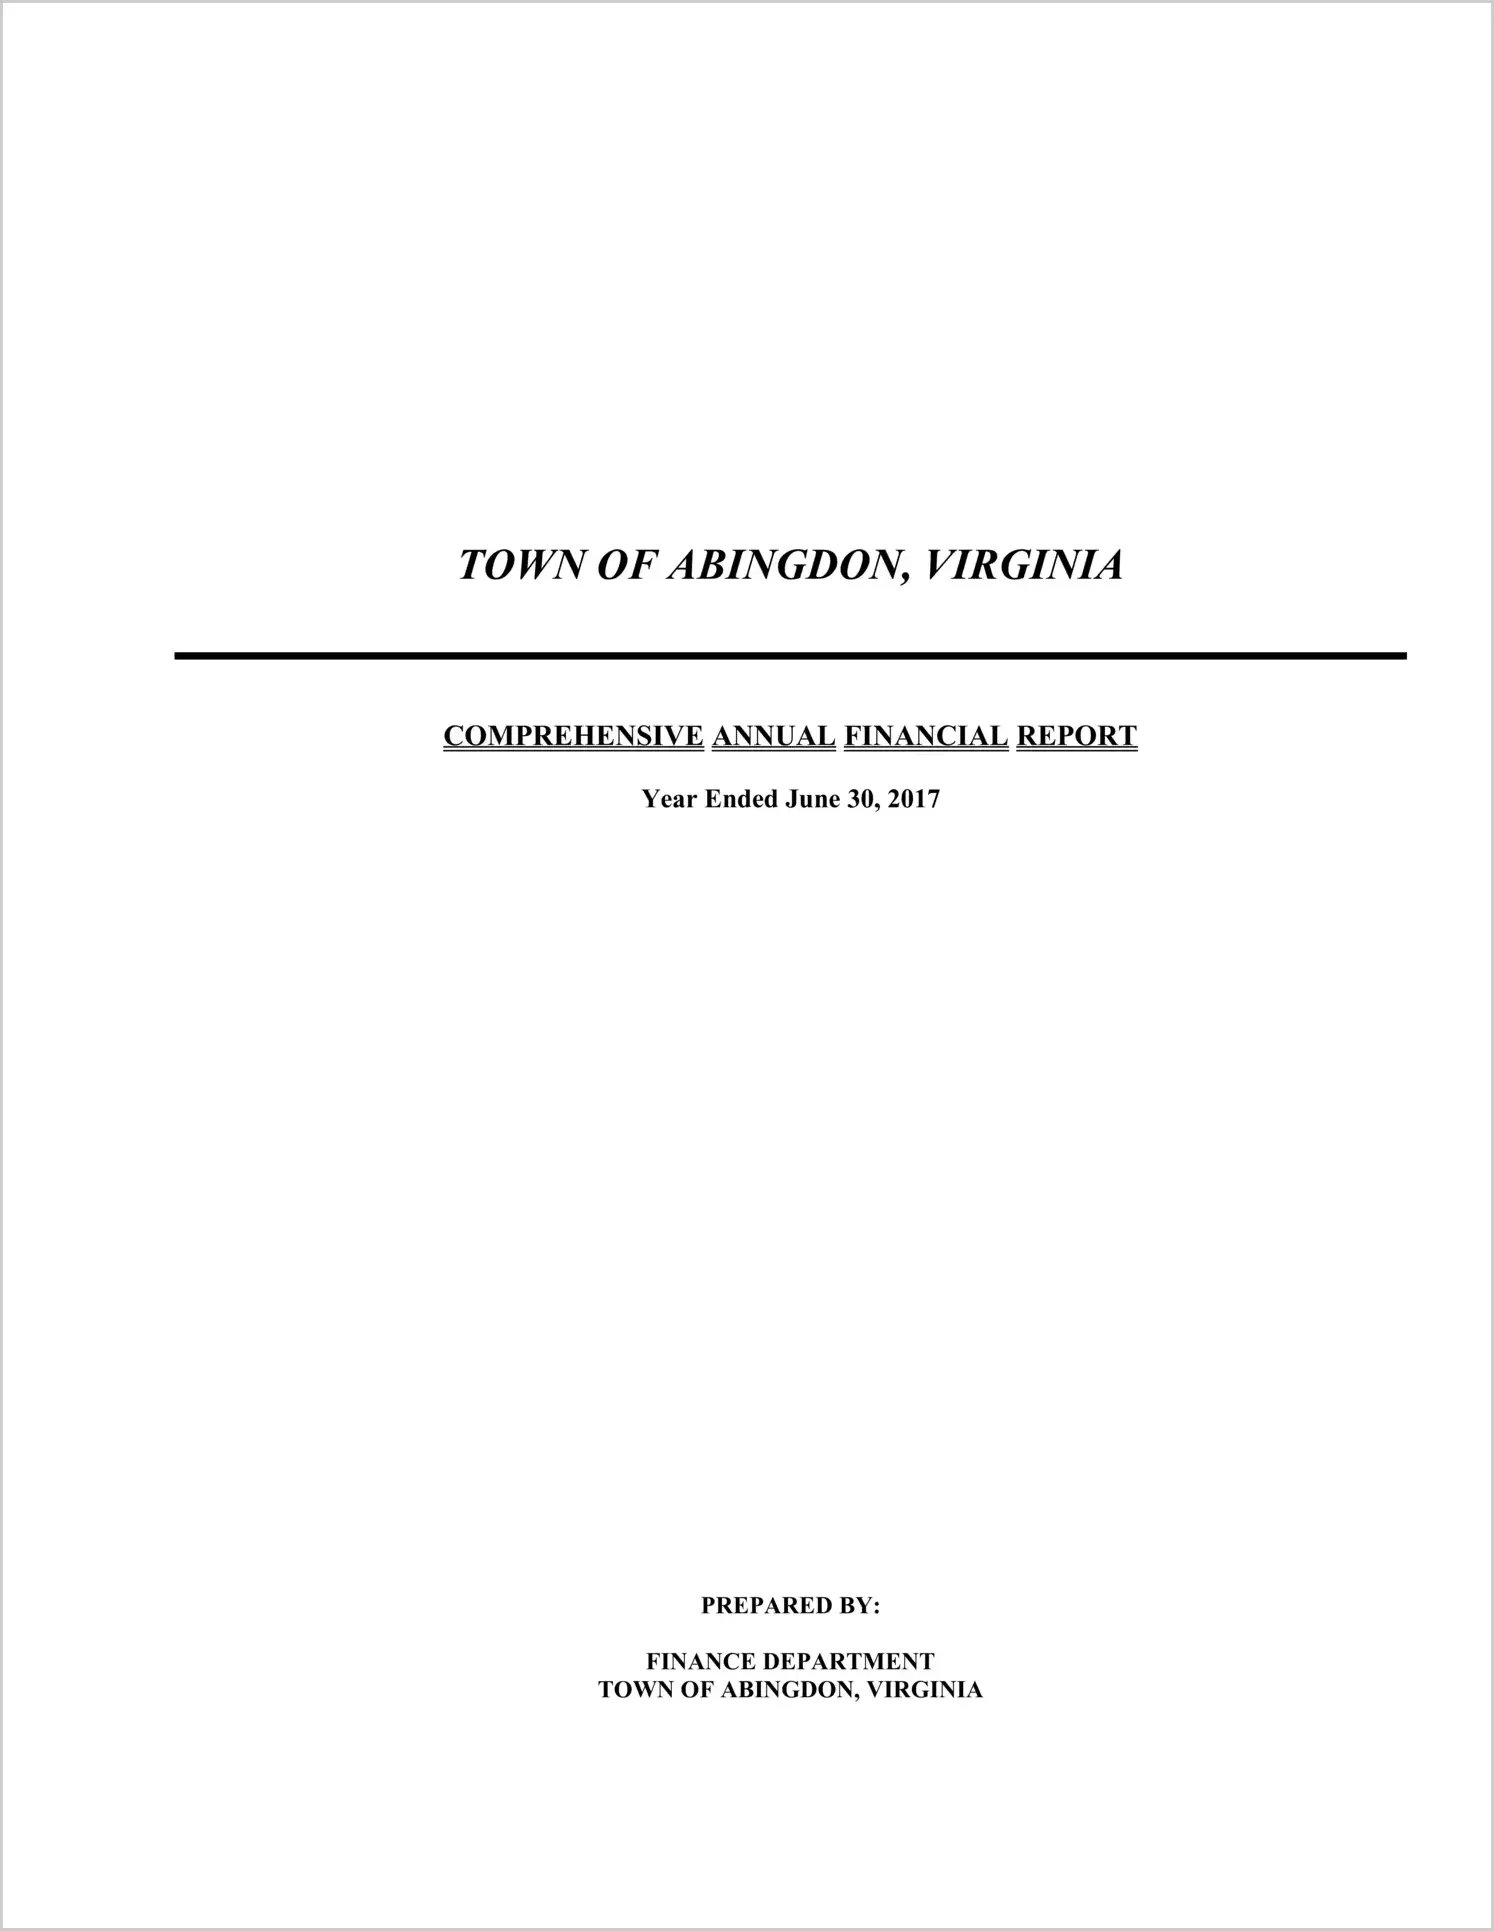 2017 Annual Financial Report for Town of Abingdon